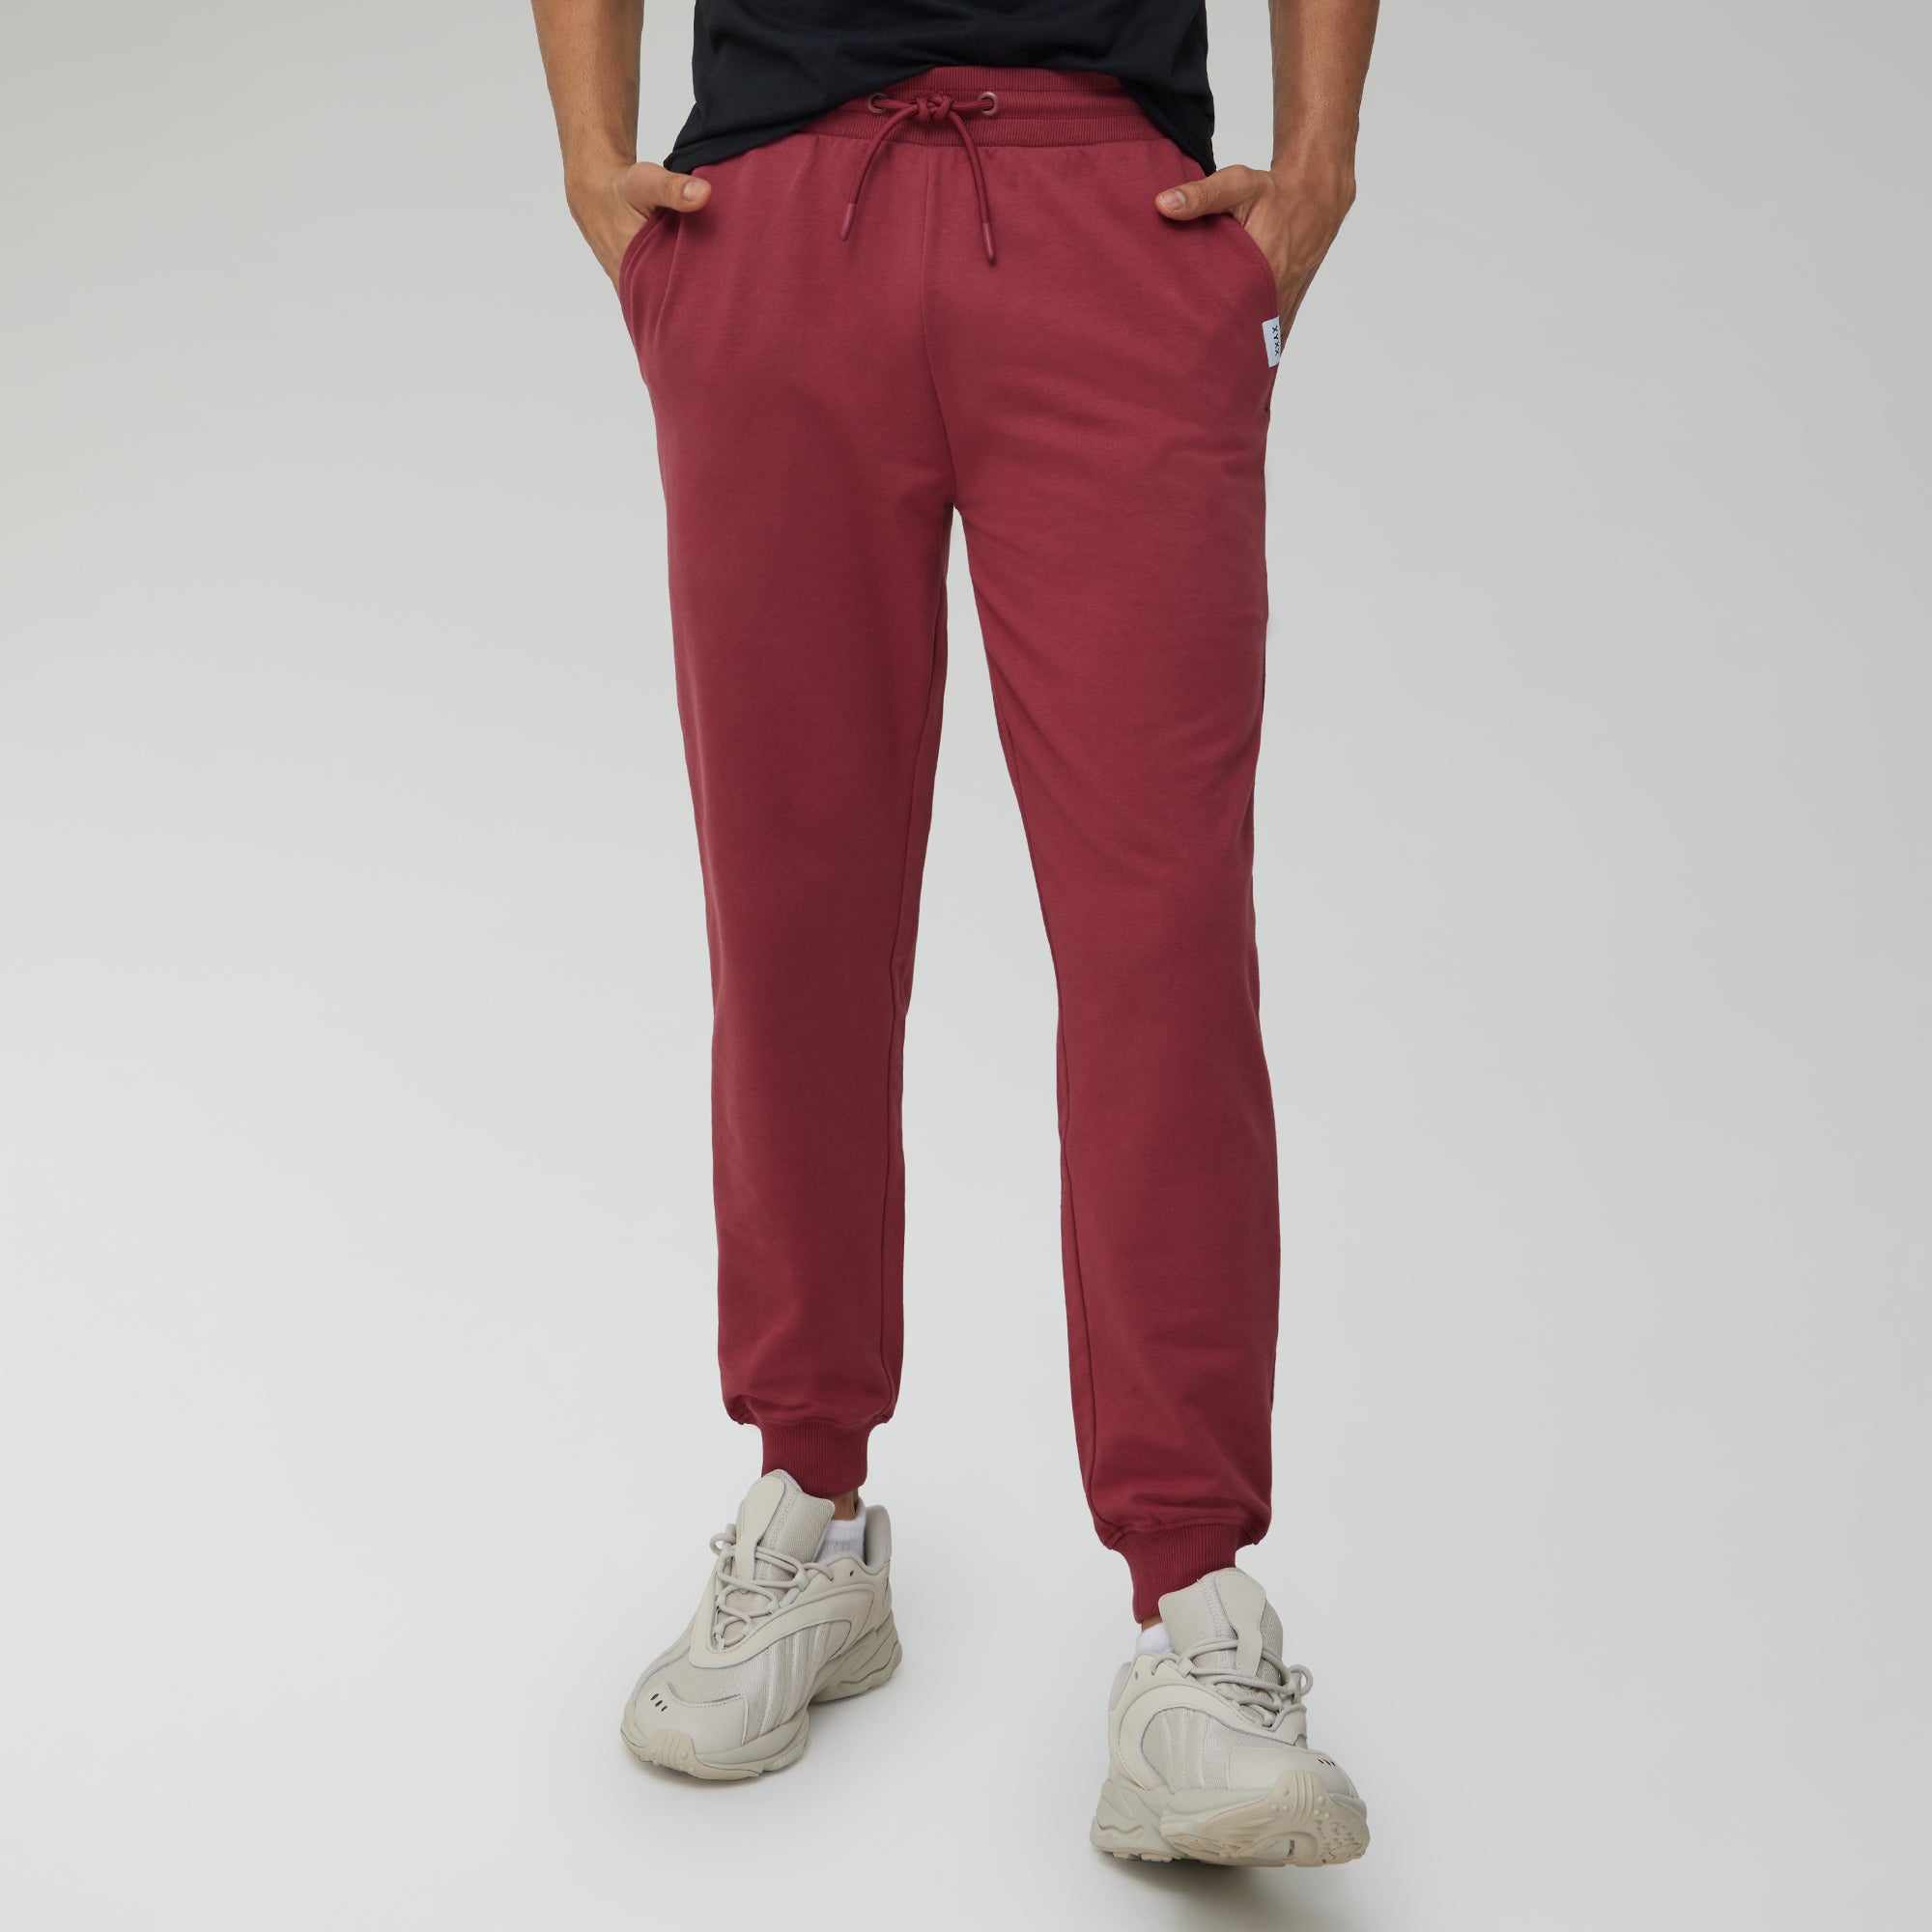 Joggers For Men - Buy Joggers Online For Men India